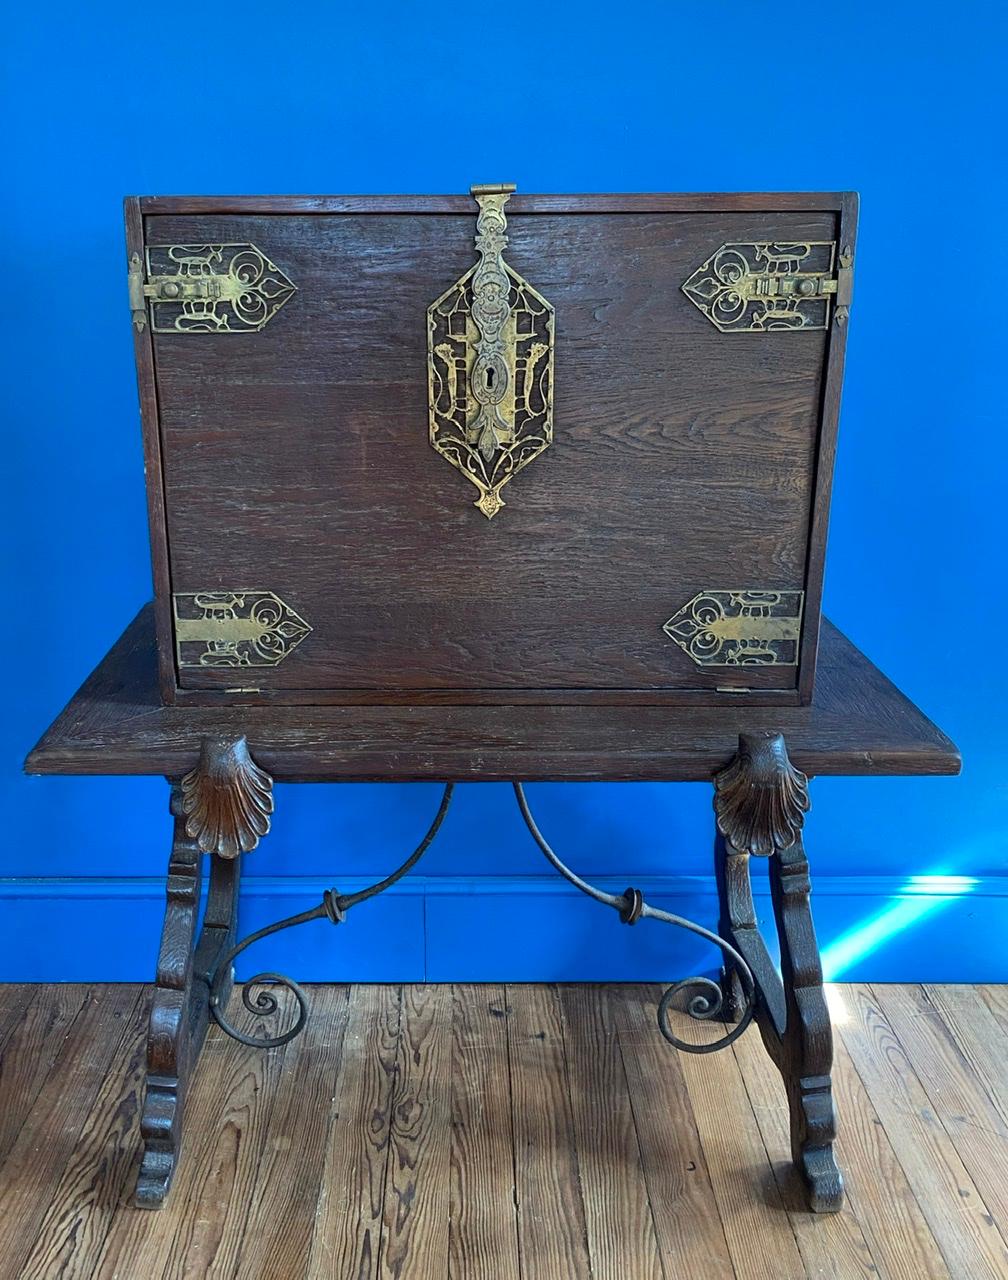 The Bargueno is a portable desk. The base is typically Spanish and dates from 20th Century. The upper part was added in the 20th century in England and dates from the Arts and Craft movement. A movement recognizable in its different